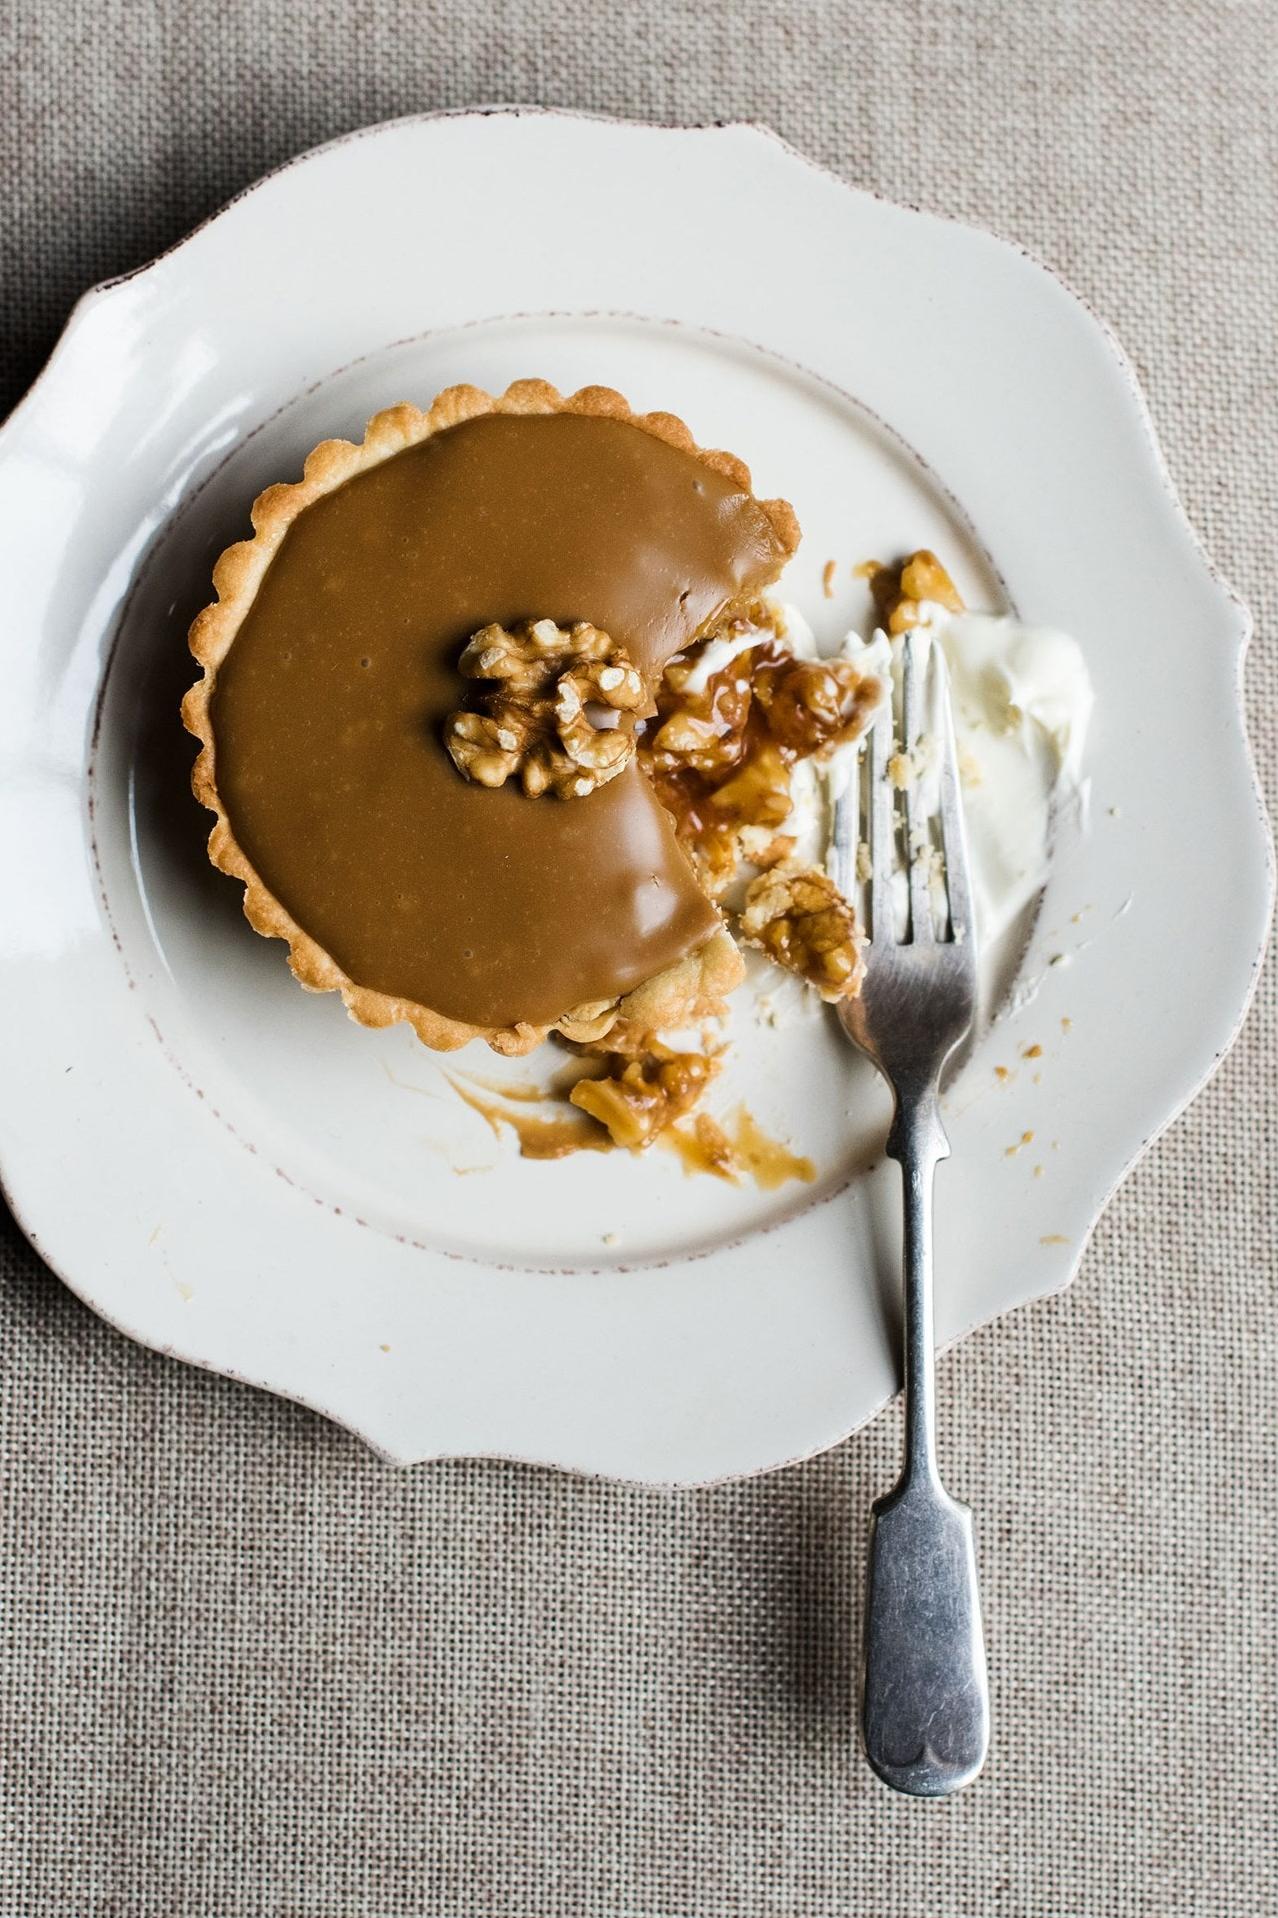  Coffee and walnuts make the ultimate flavor duo in this pie.